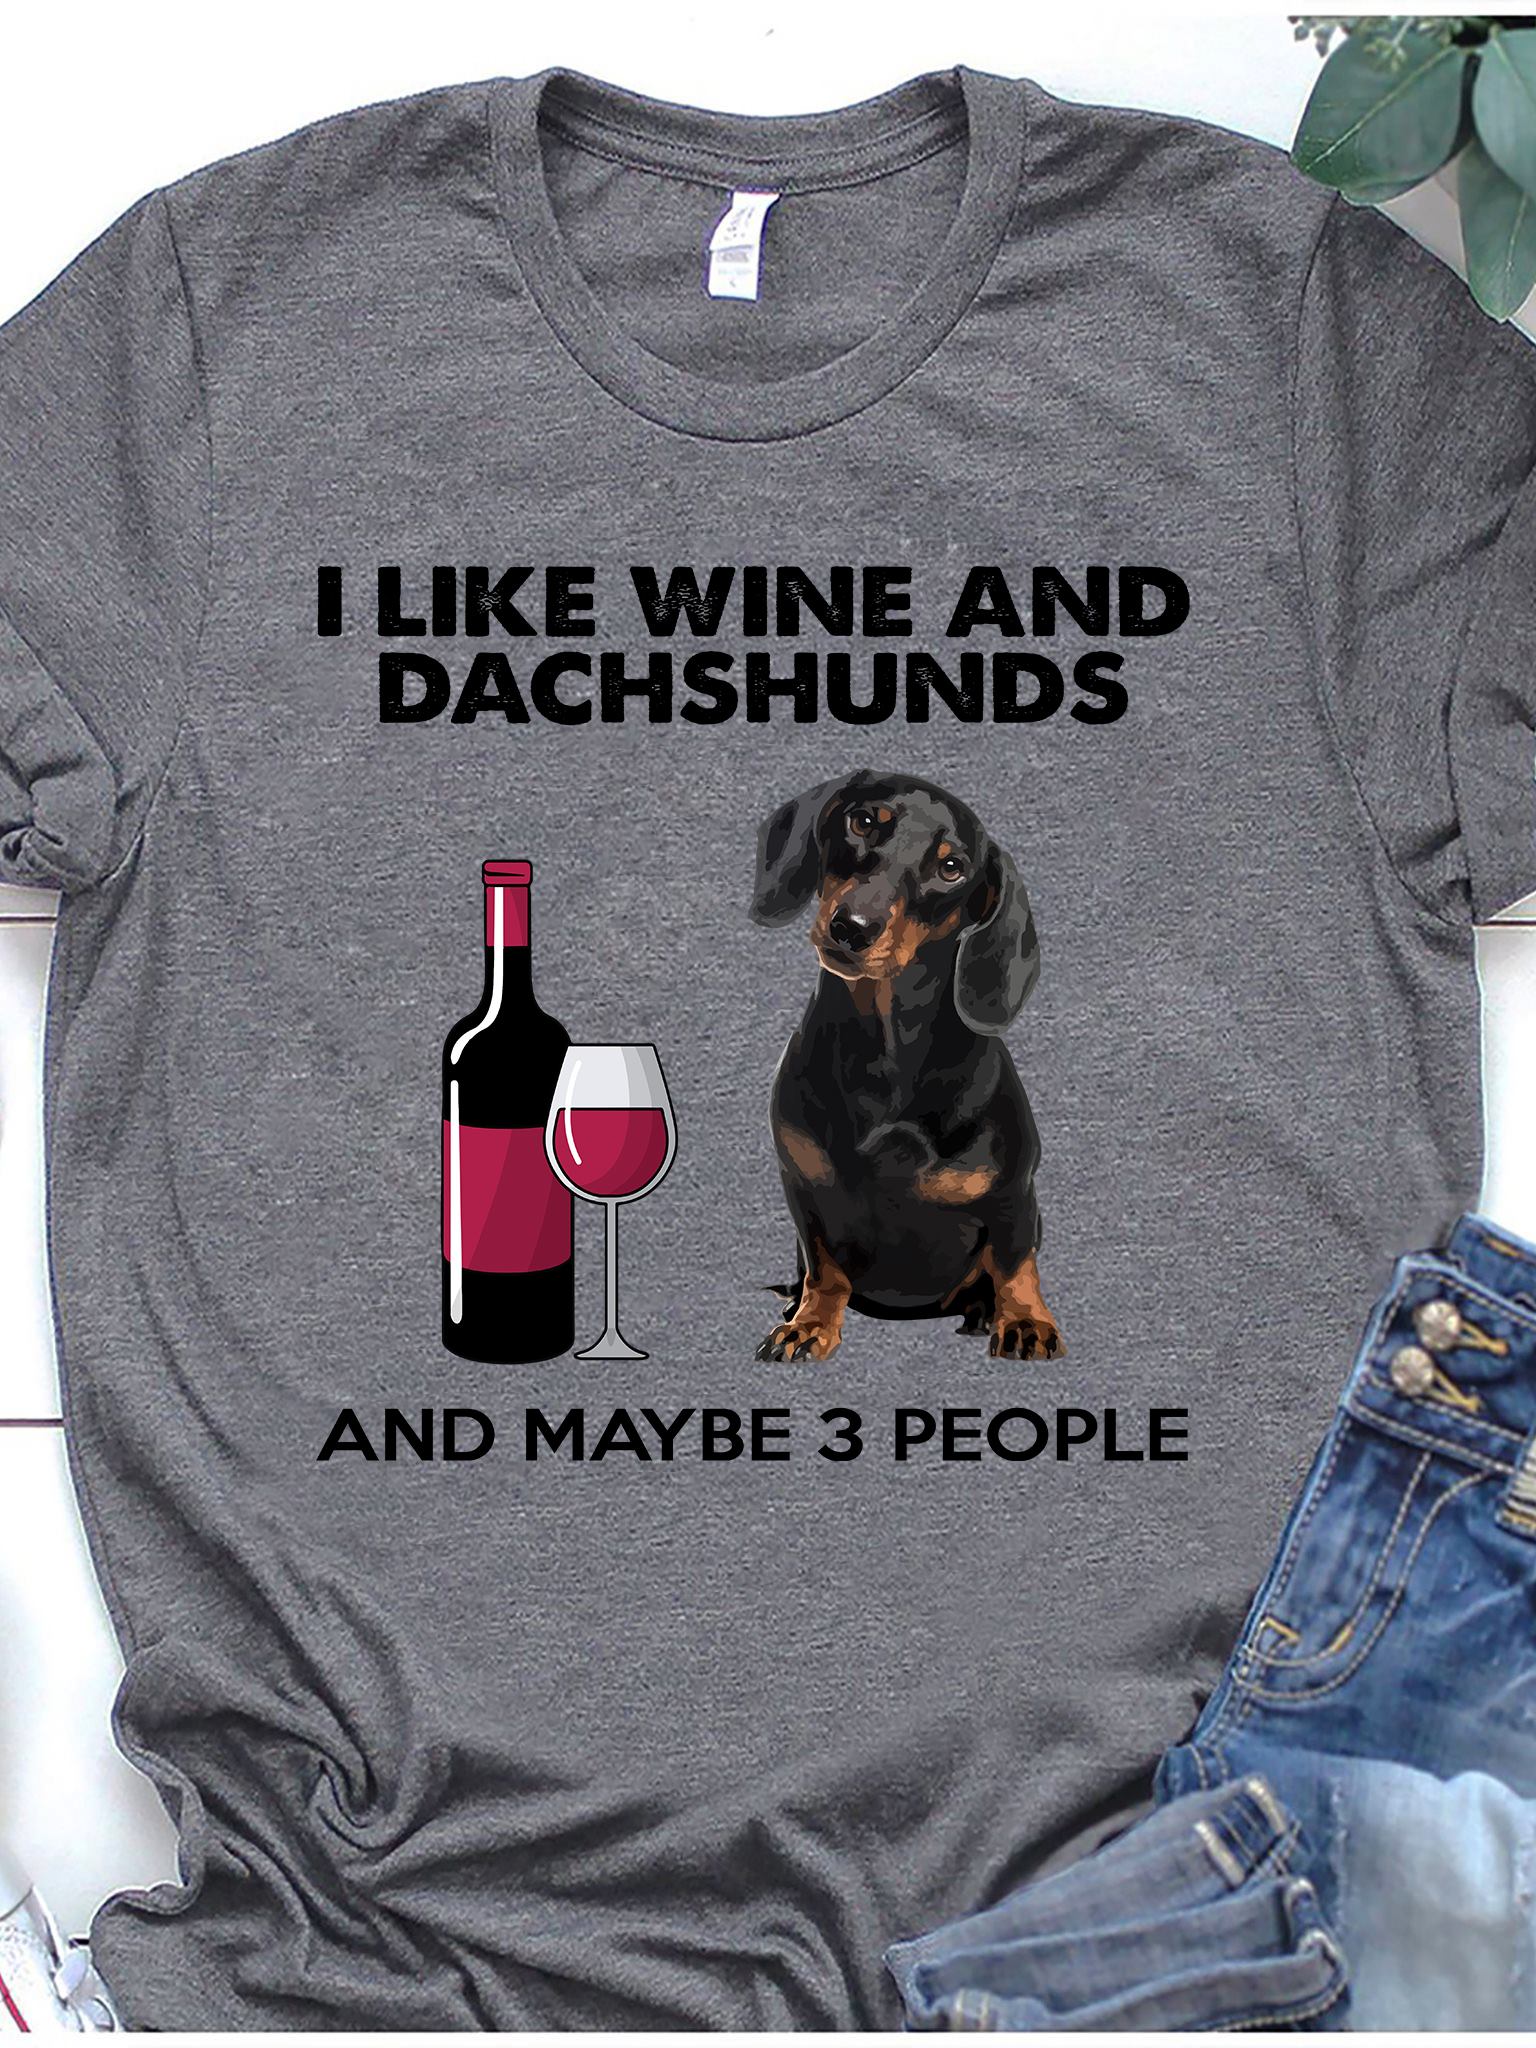 I like wine and dachshunds and maybe 3 people